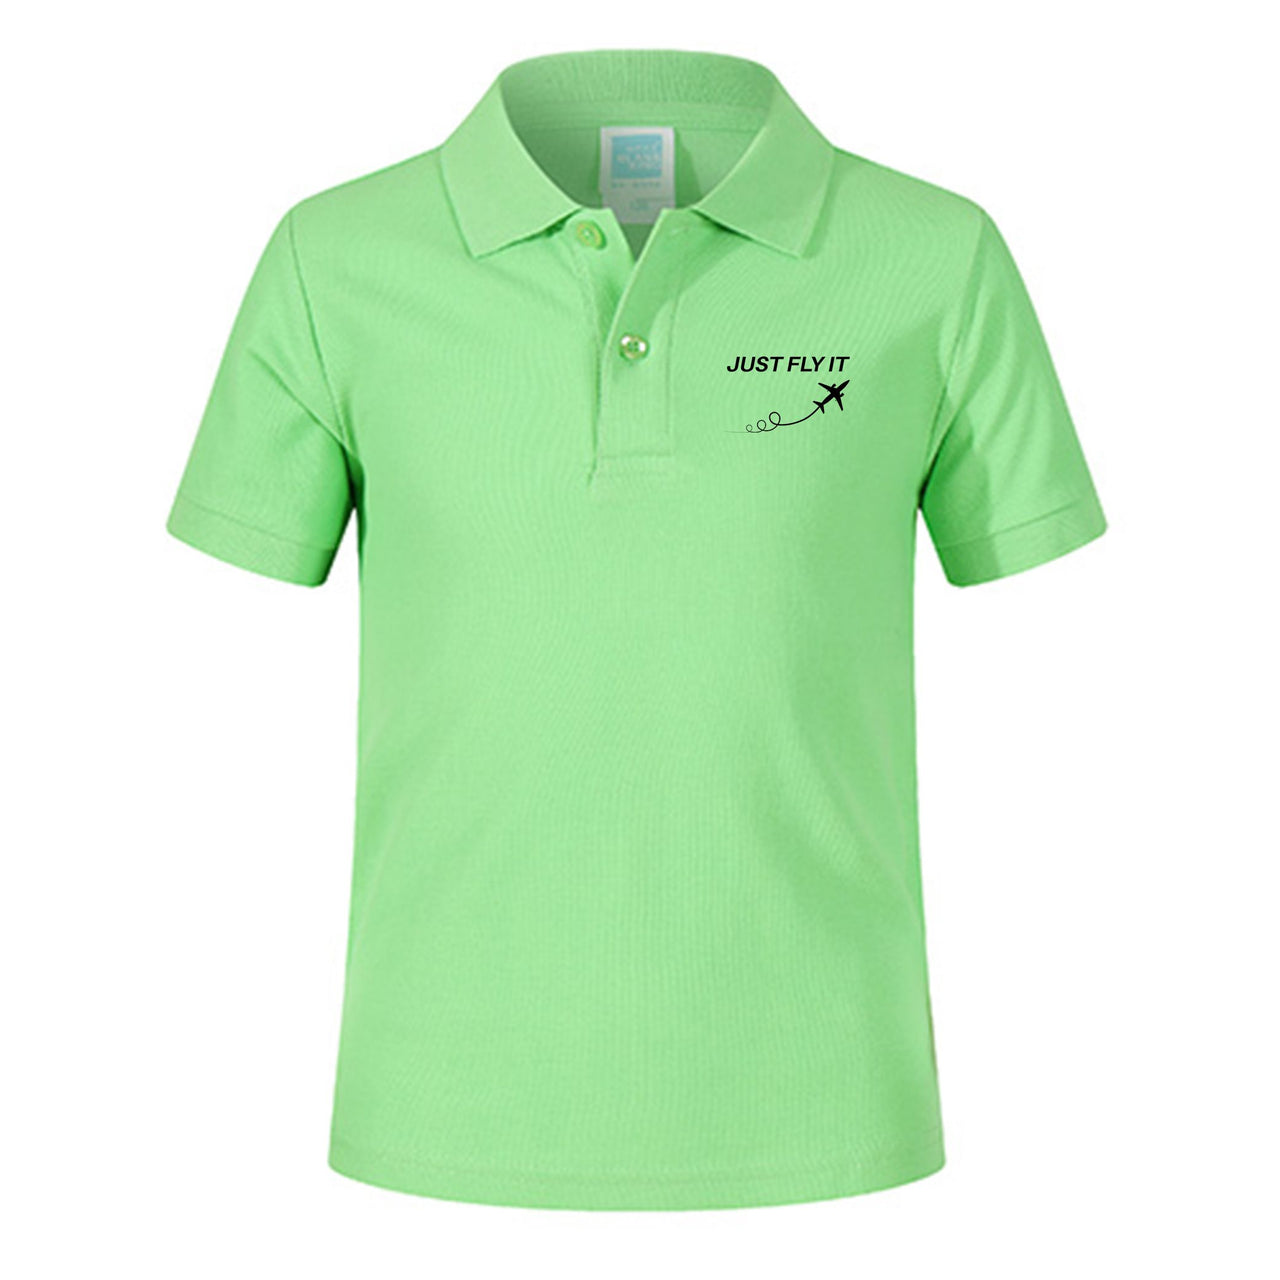 Just Fly It Designed Children Polo T-Shirts